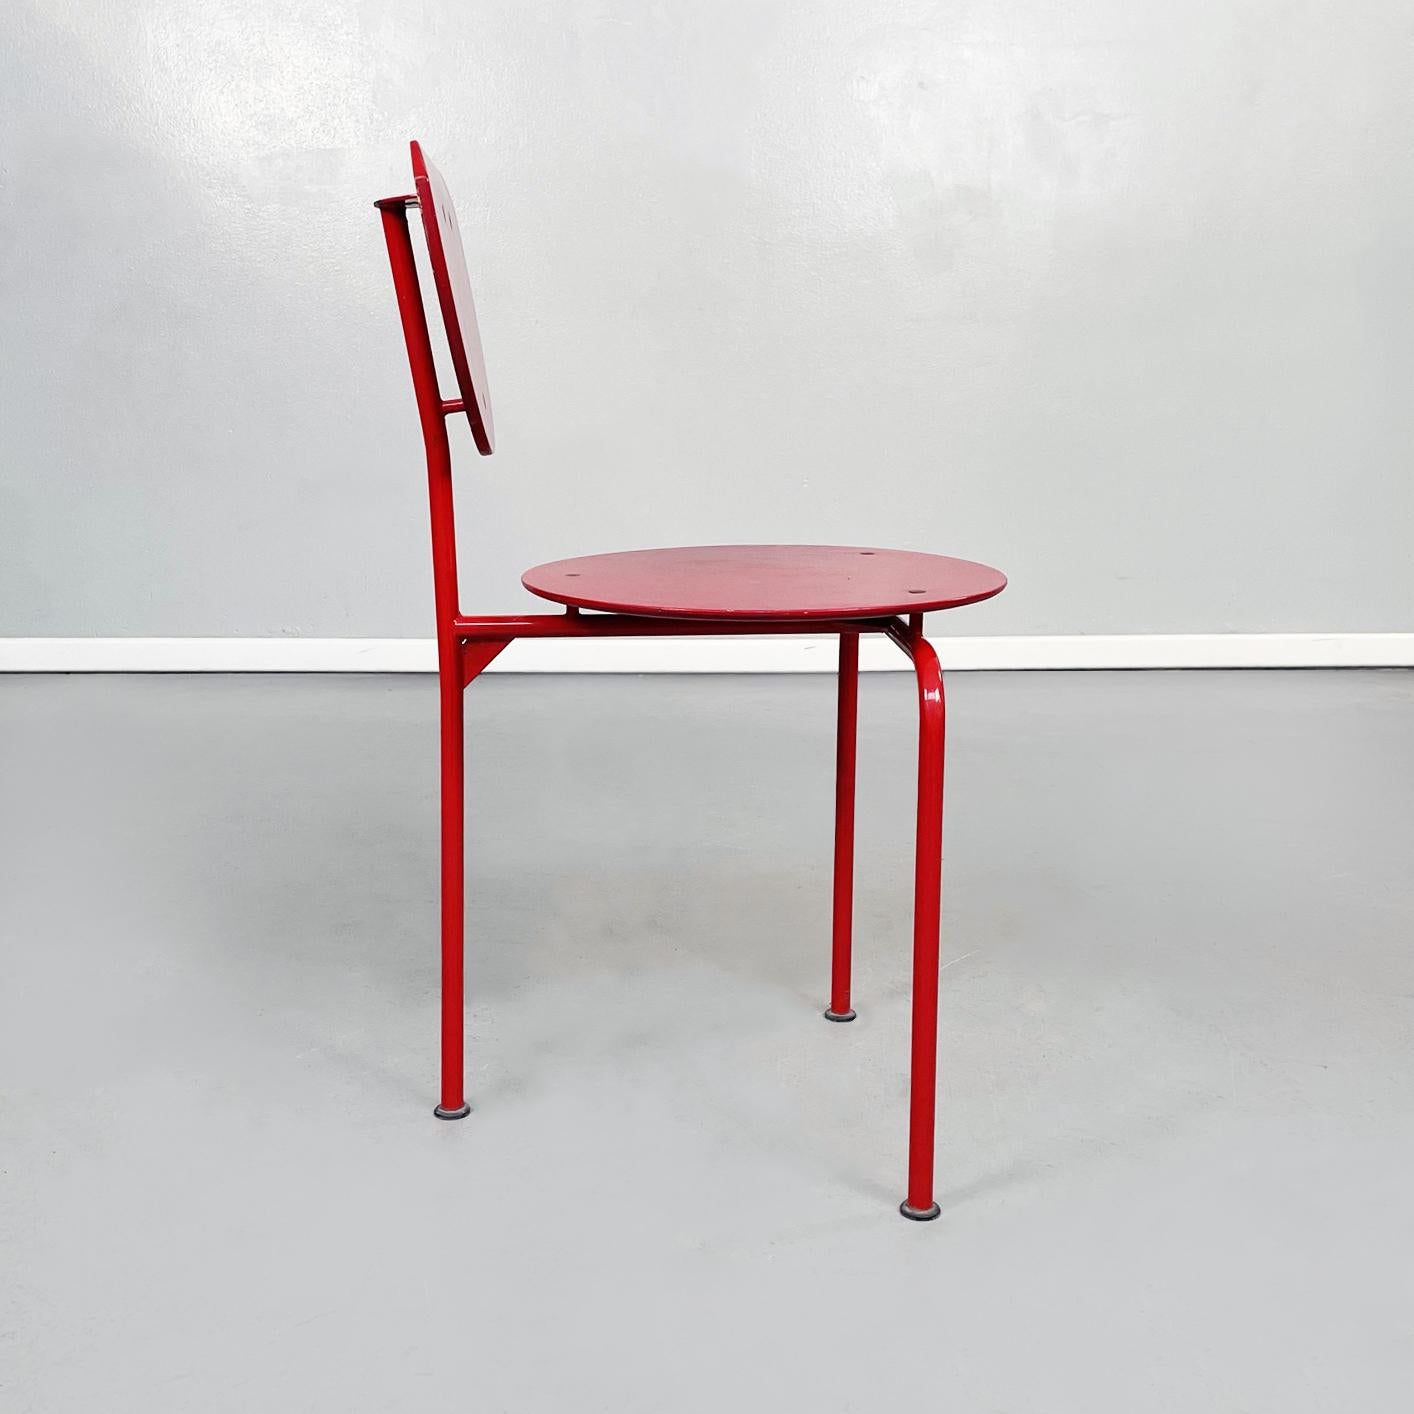 Mid-Century Modern Italian Mid-Century Red Wood and Metal Alien Chair by Forcolini for Alias, 1980s For Sale